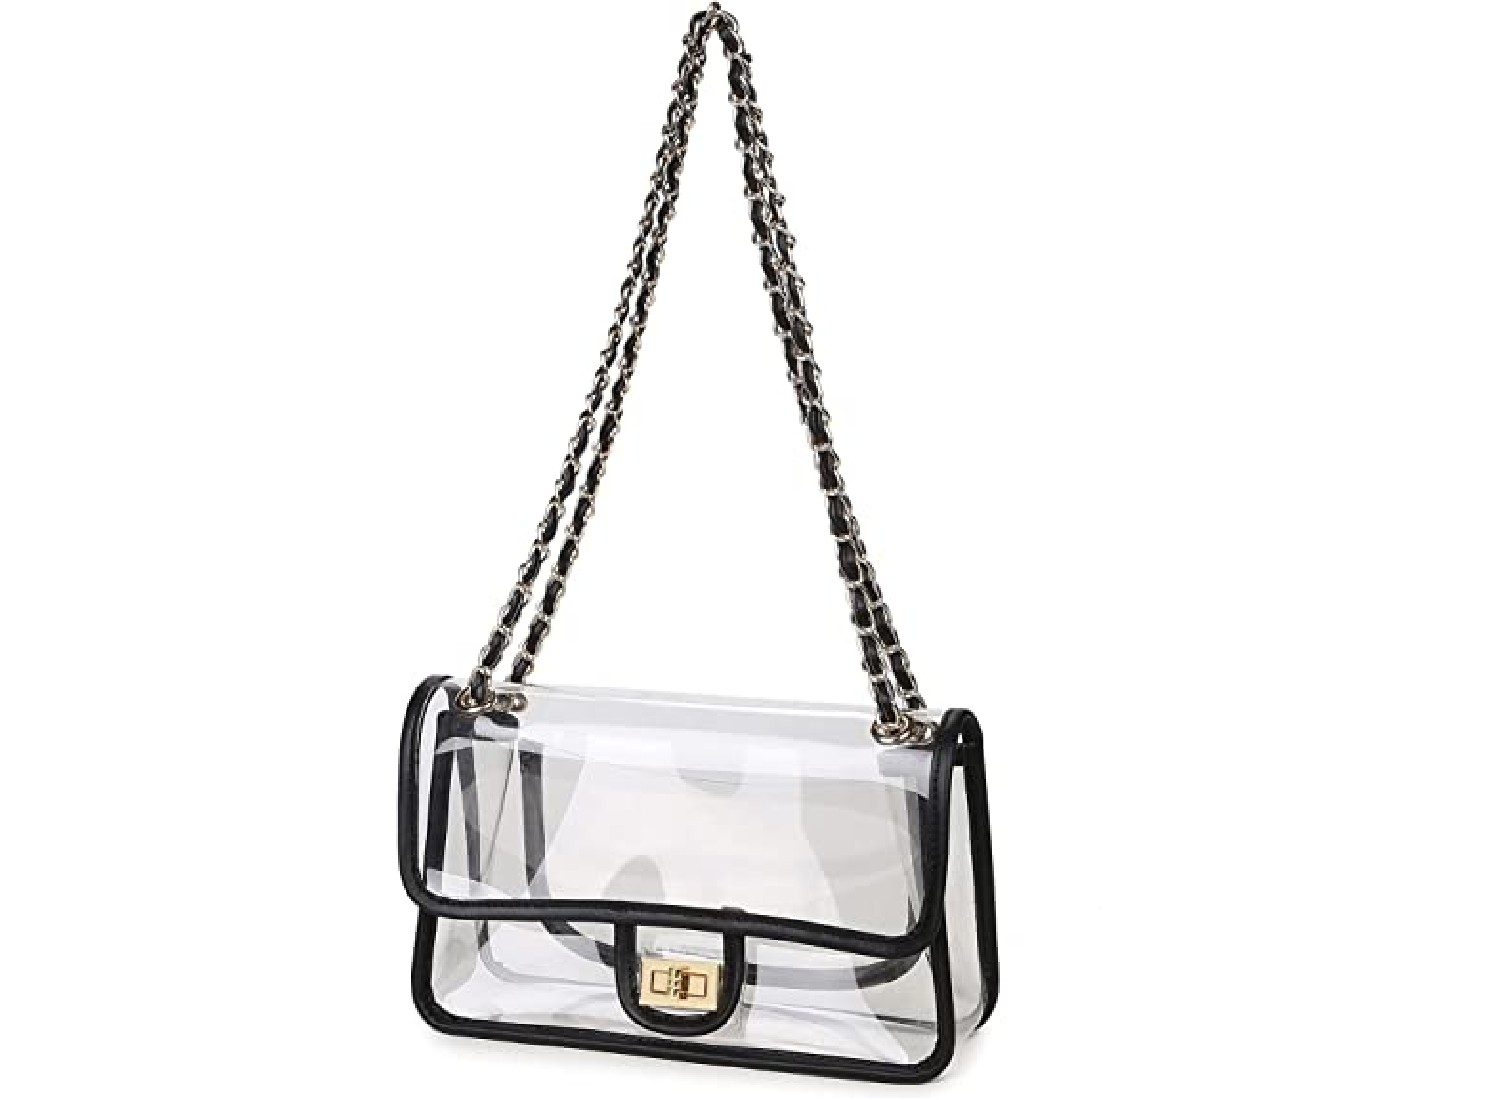 A clear bag with a golden clasp.